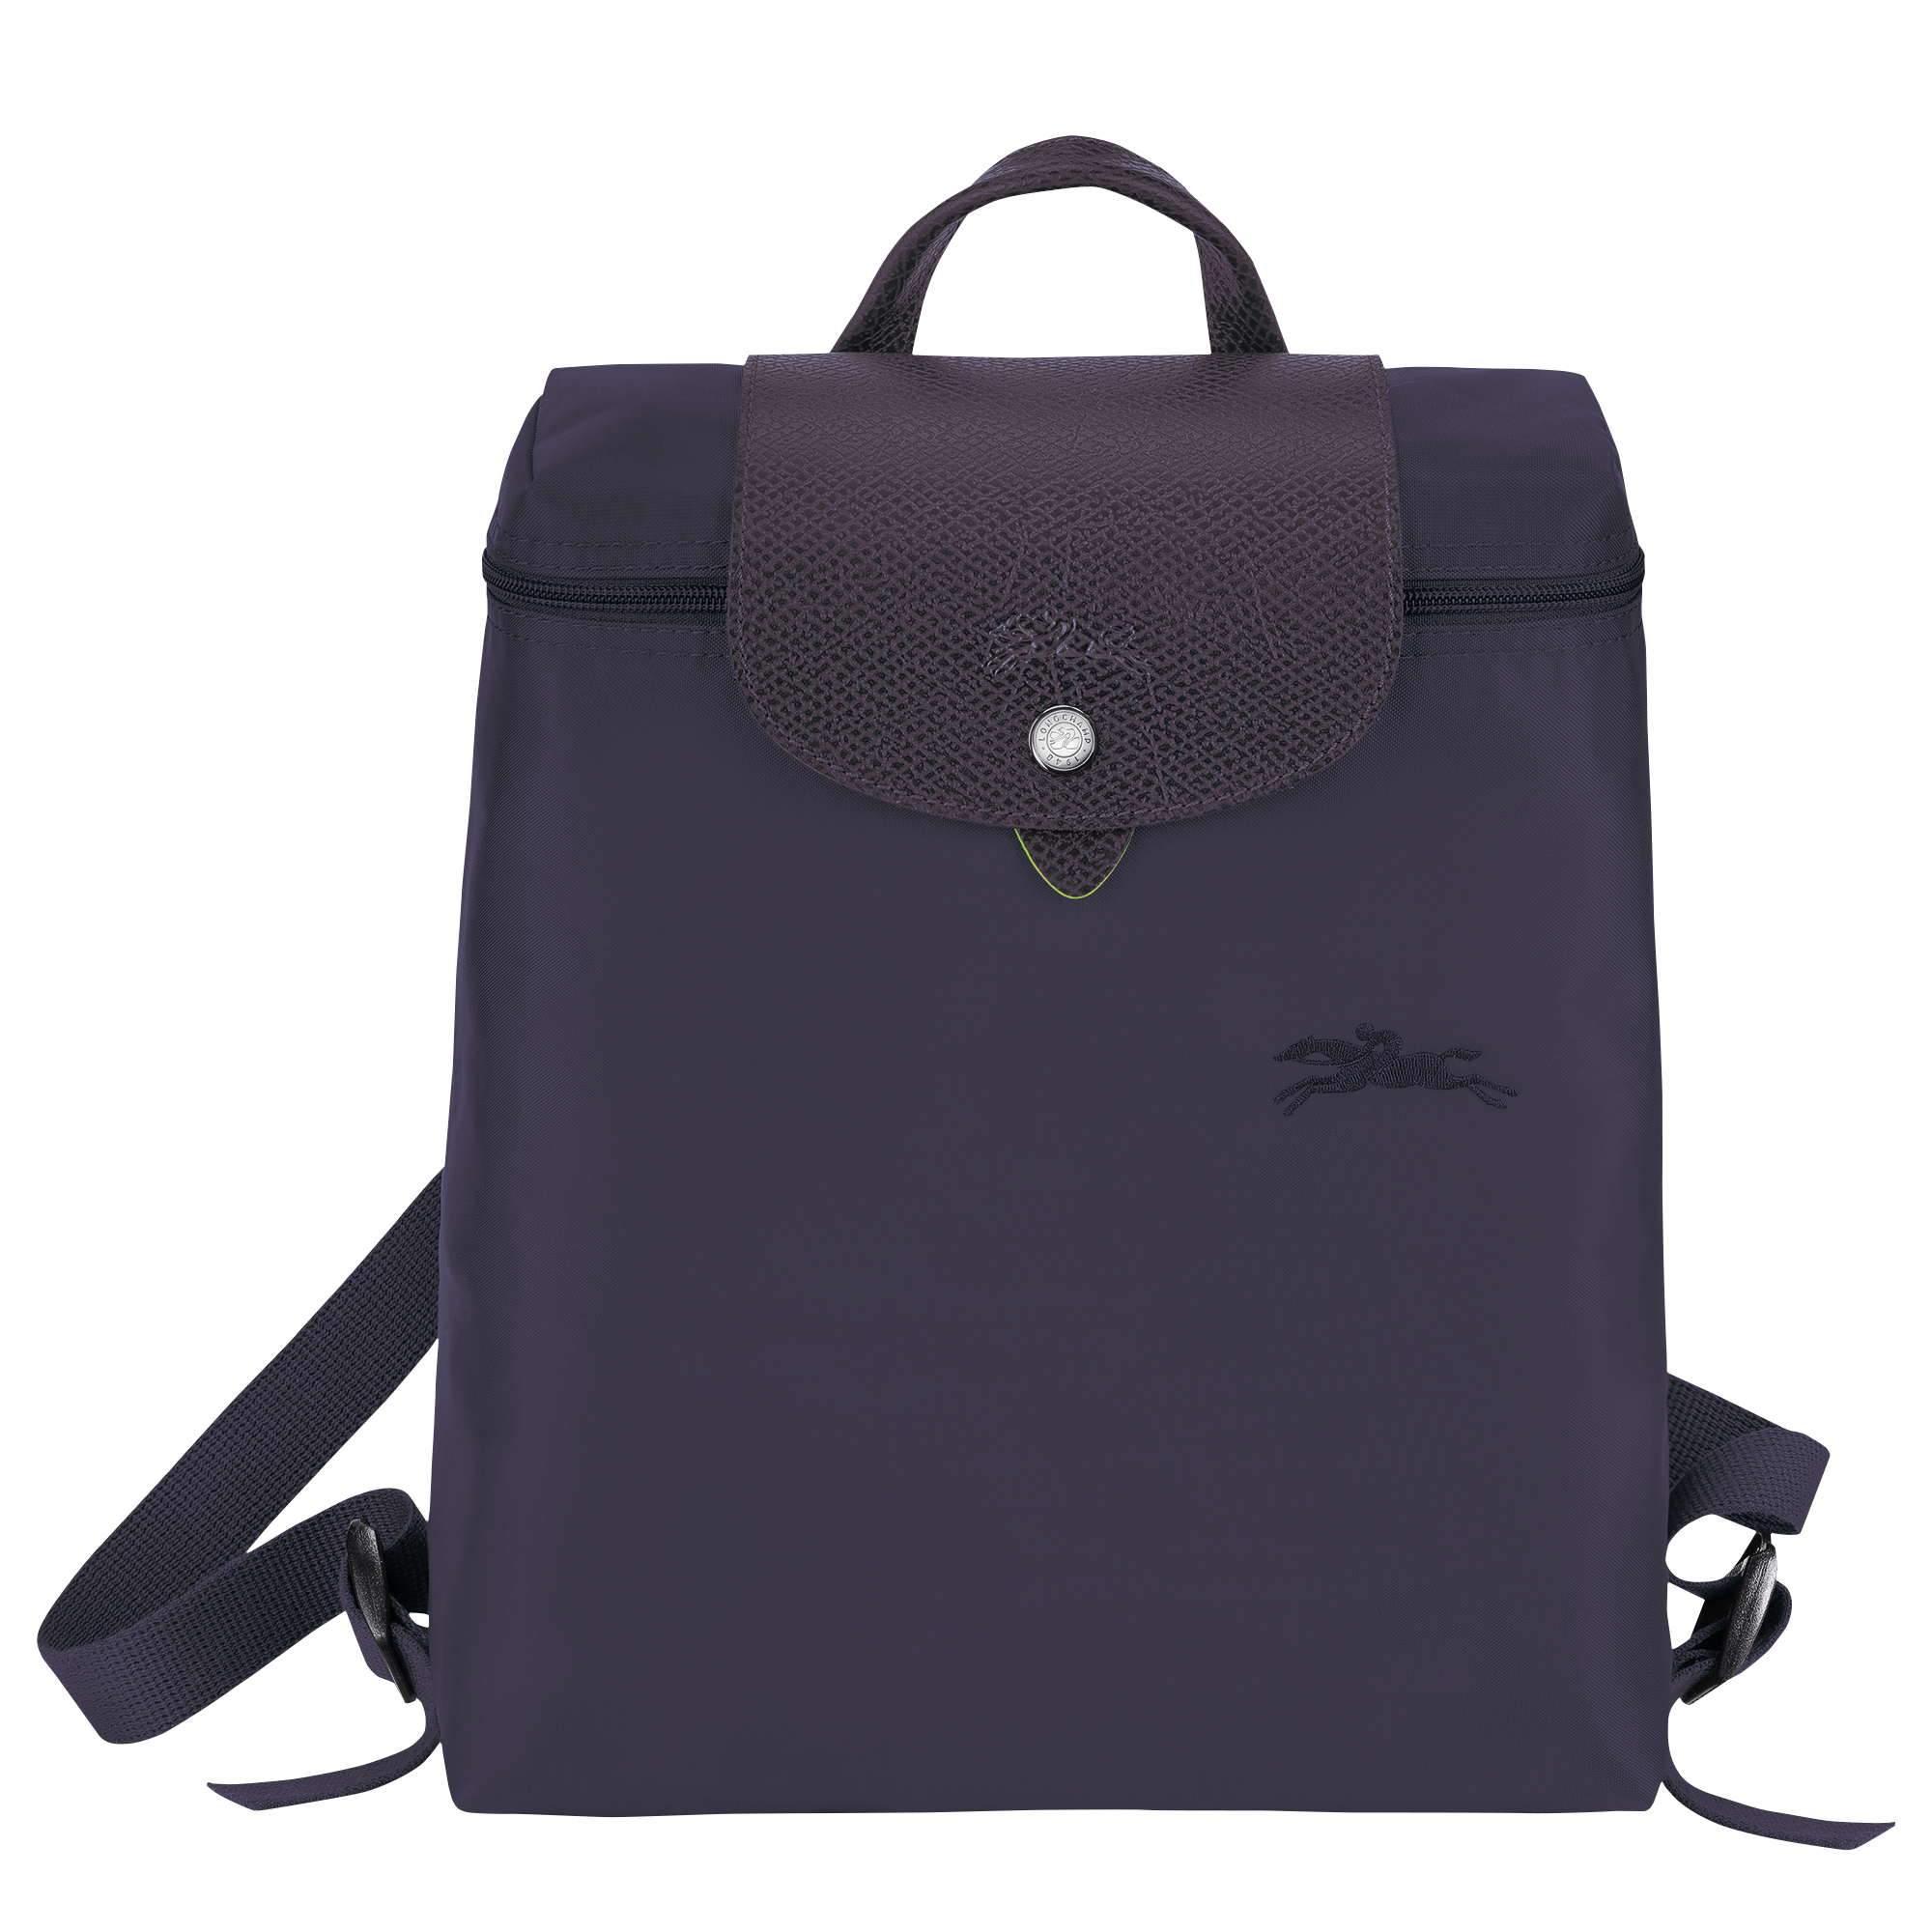 Le Pliage Green Backpack, Bilberry